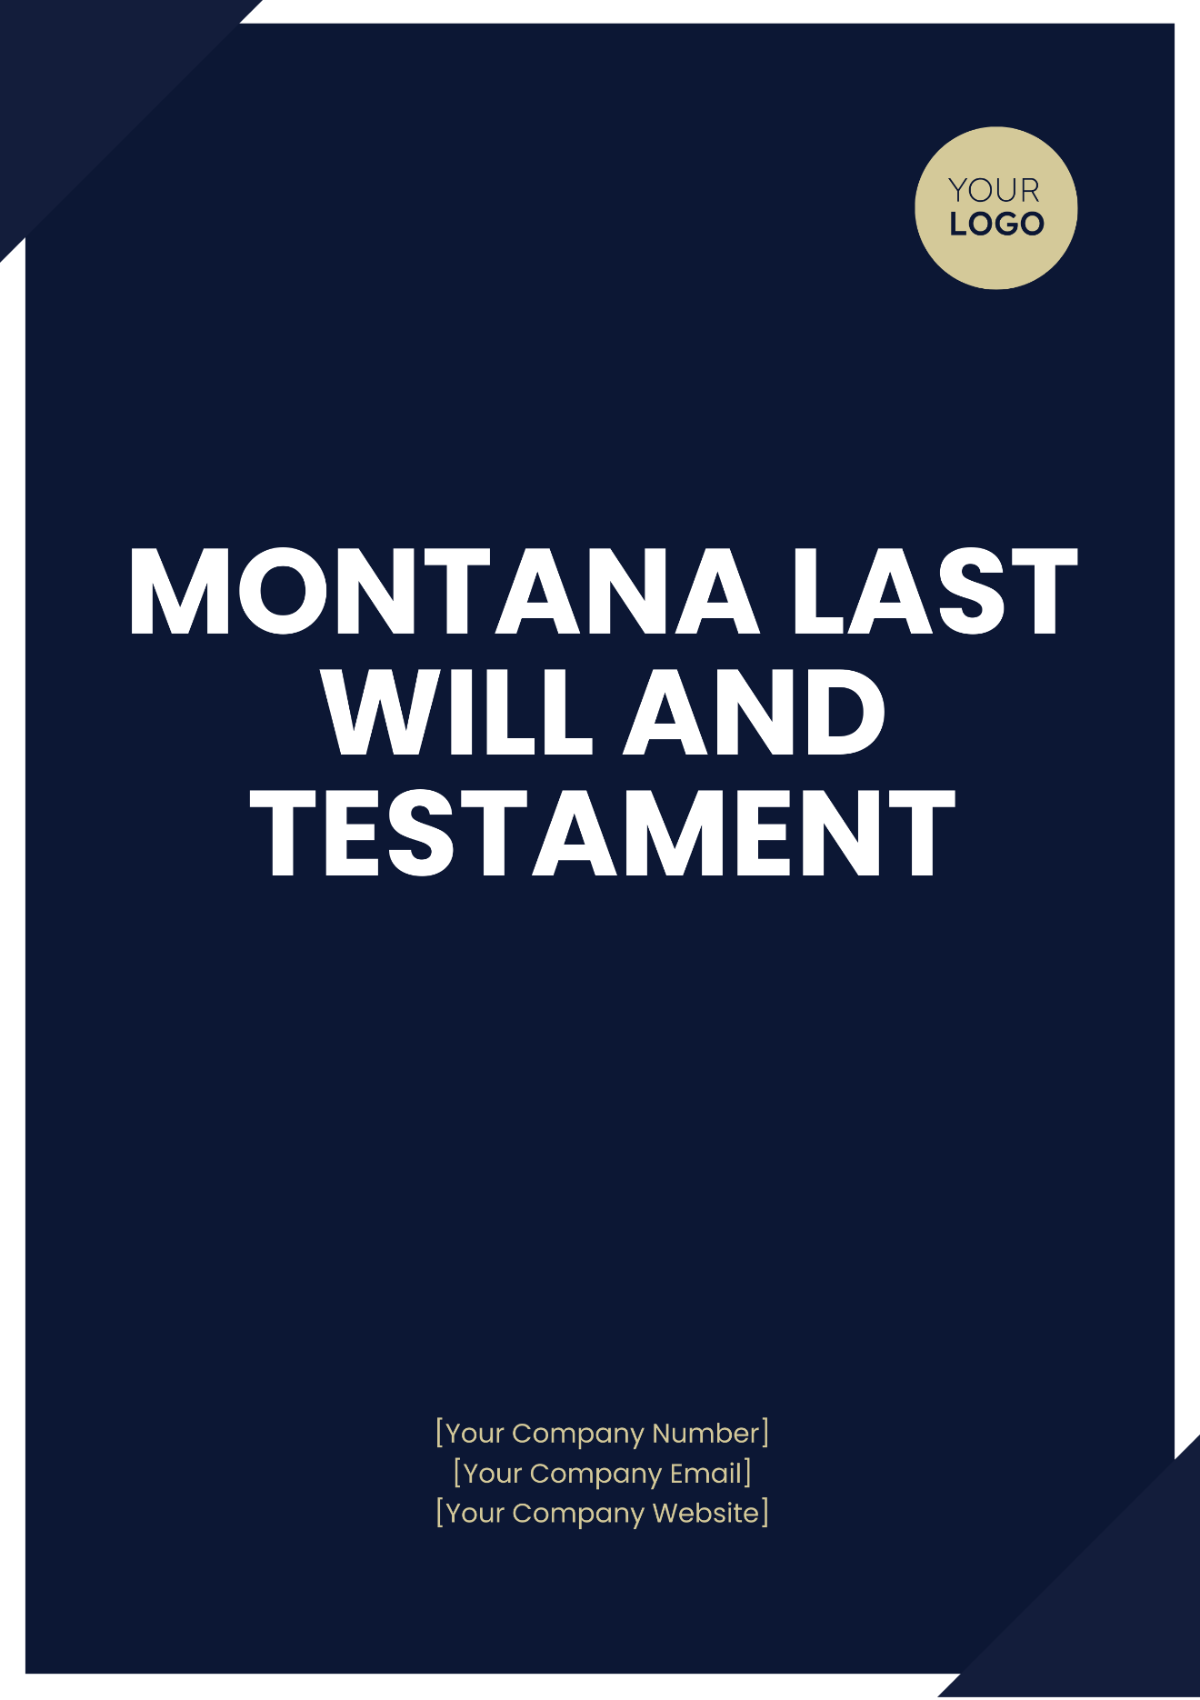 Free Montana Last Will and Testament Template